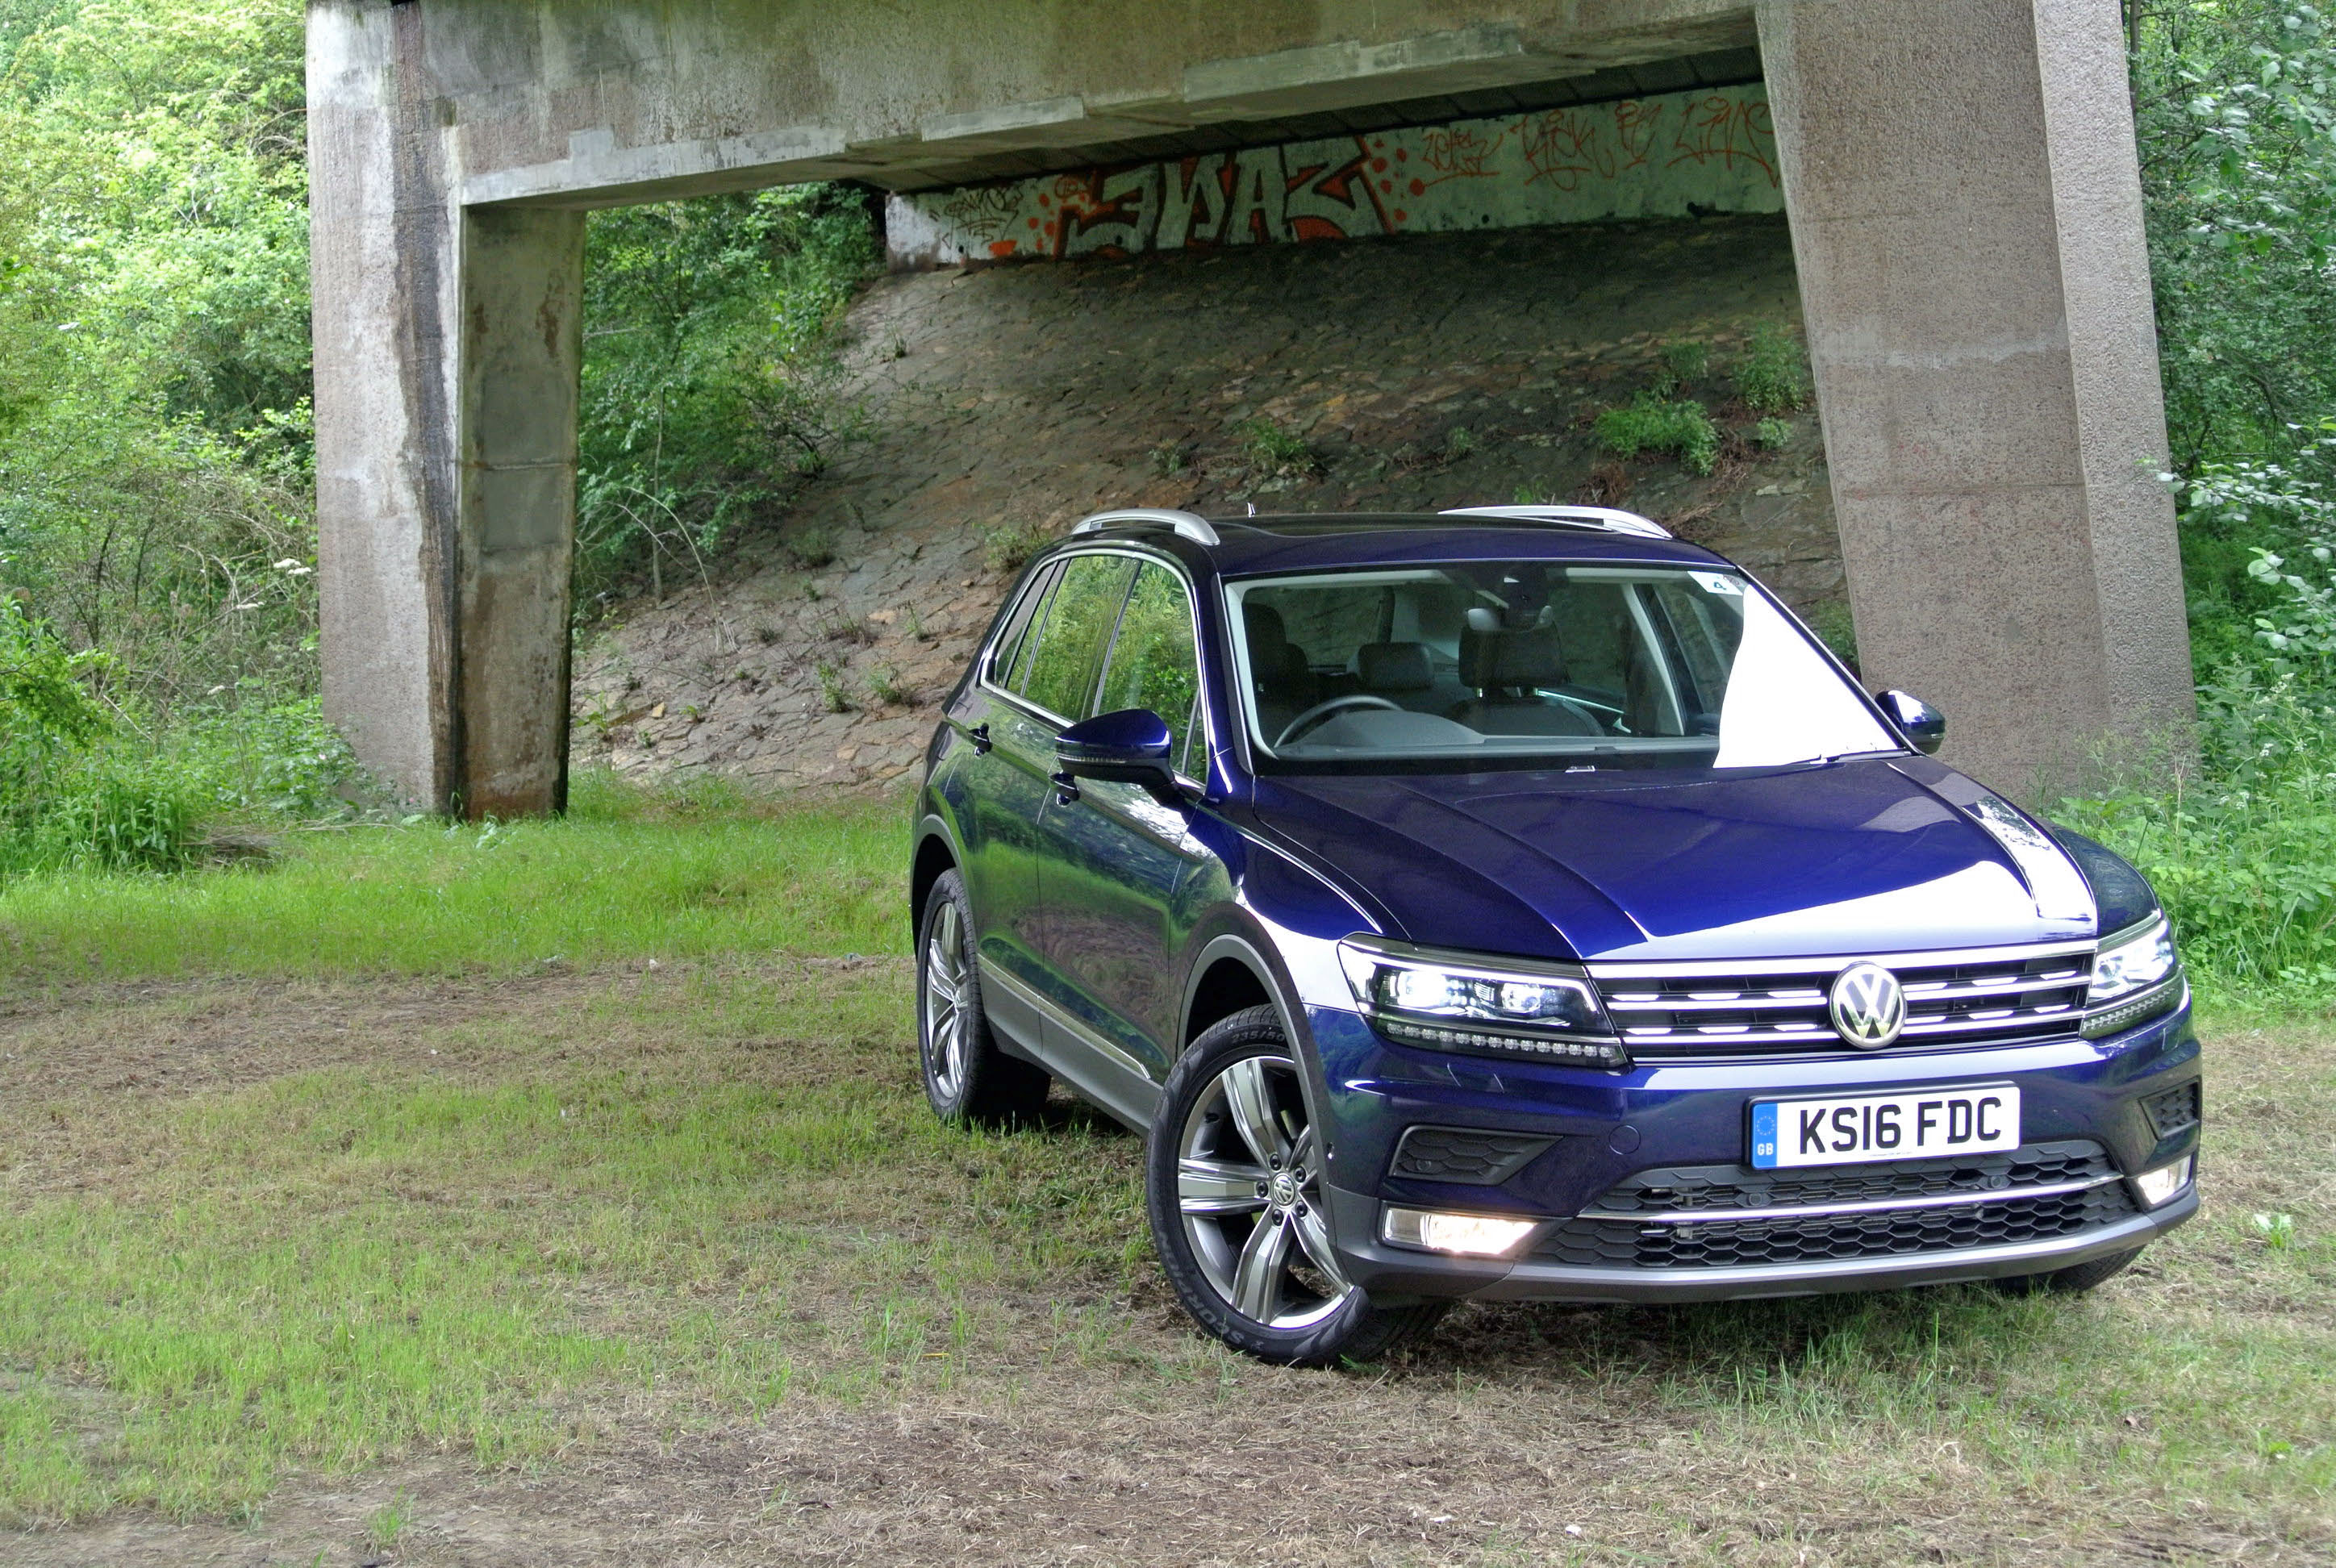 VW’s Tiguan – a monstrously pricey step in the wrong direction?